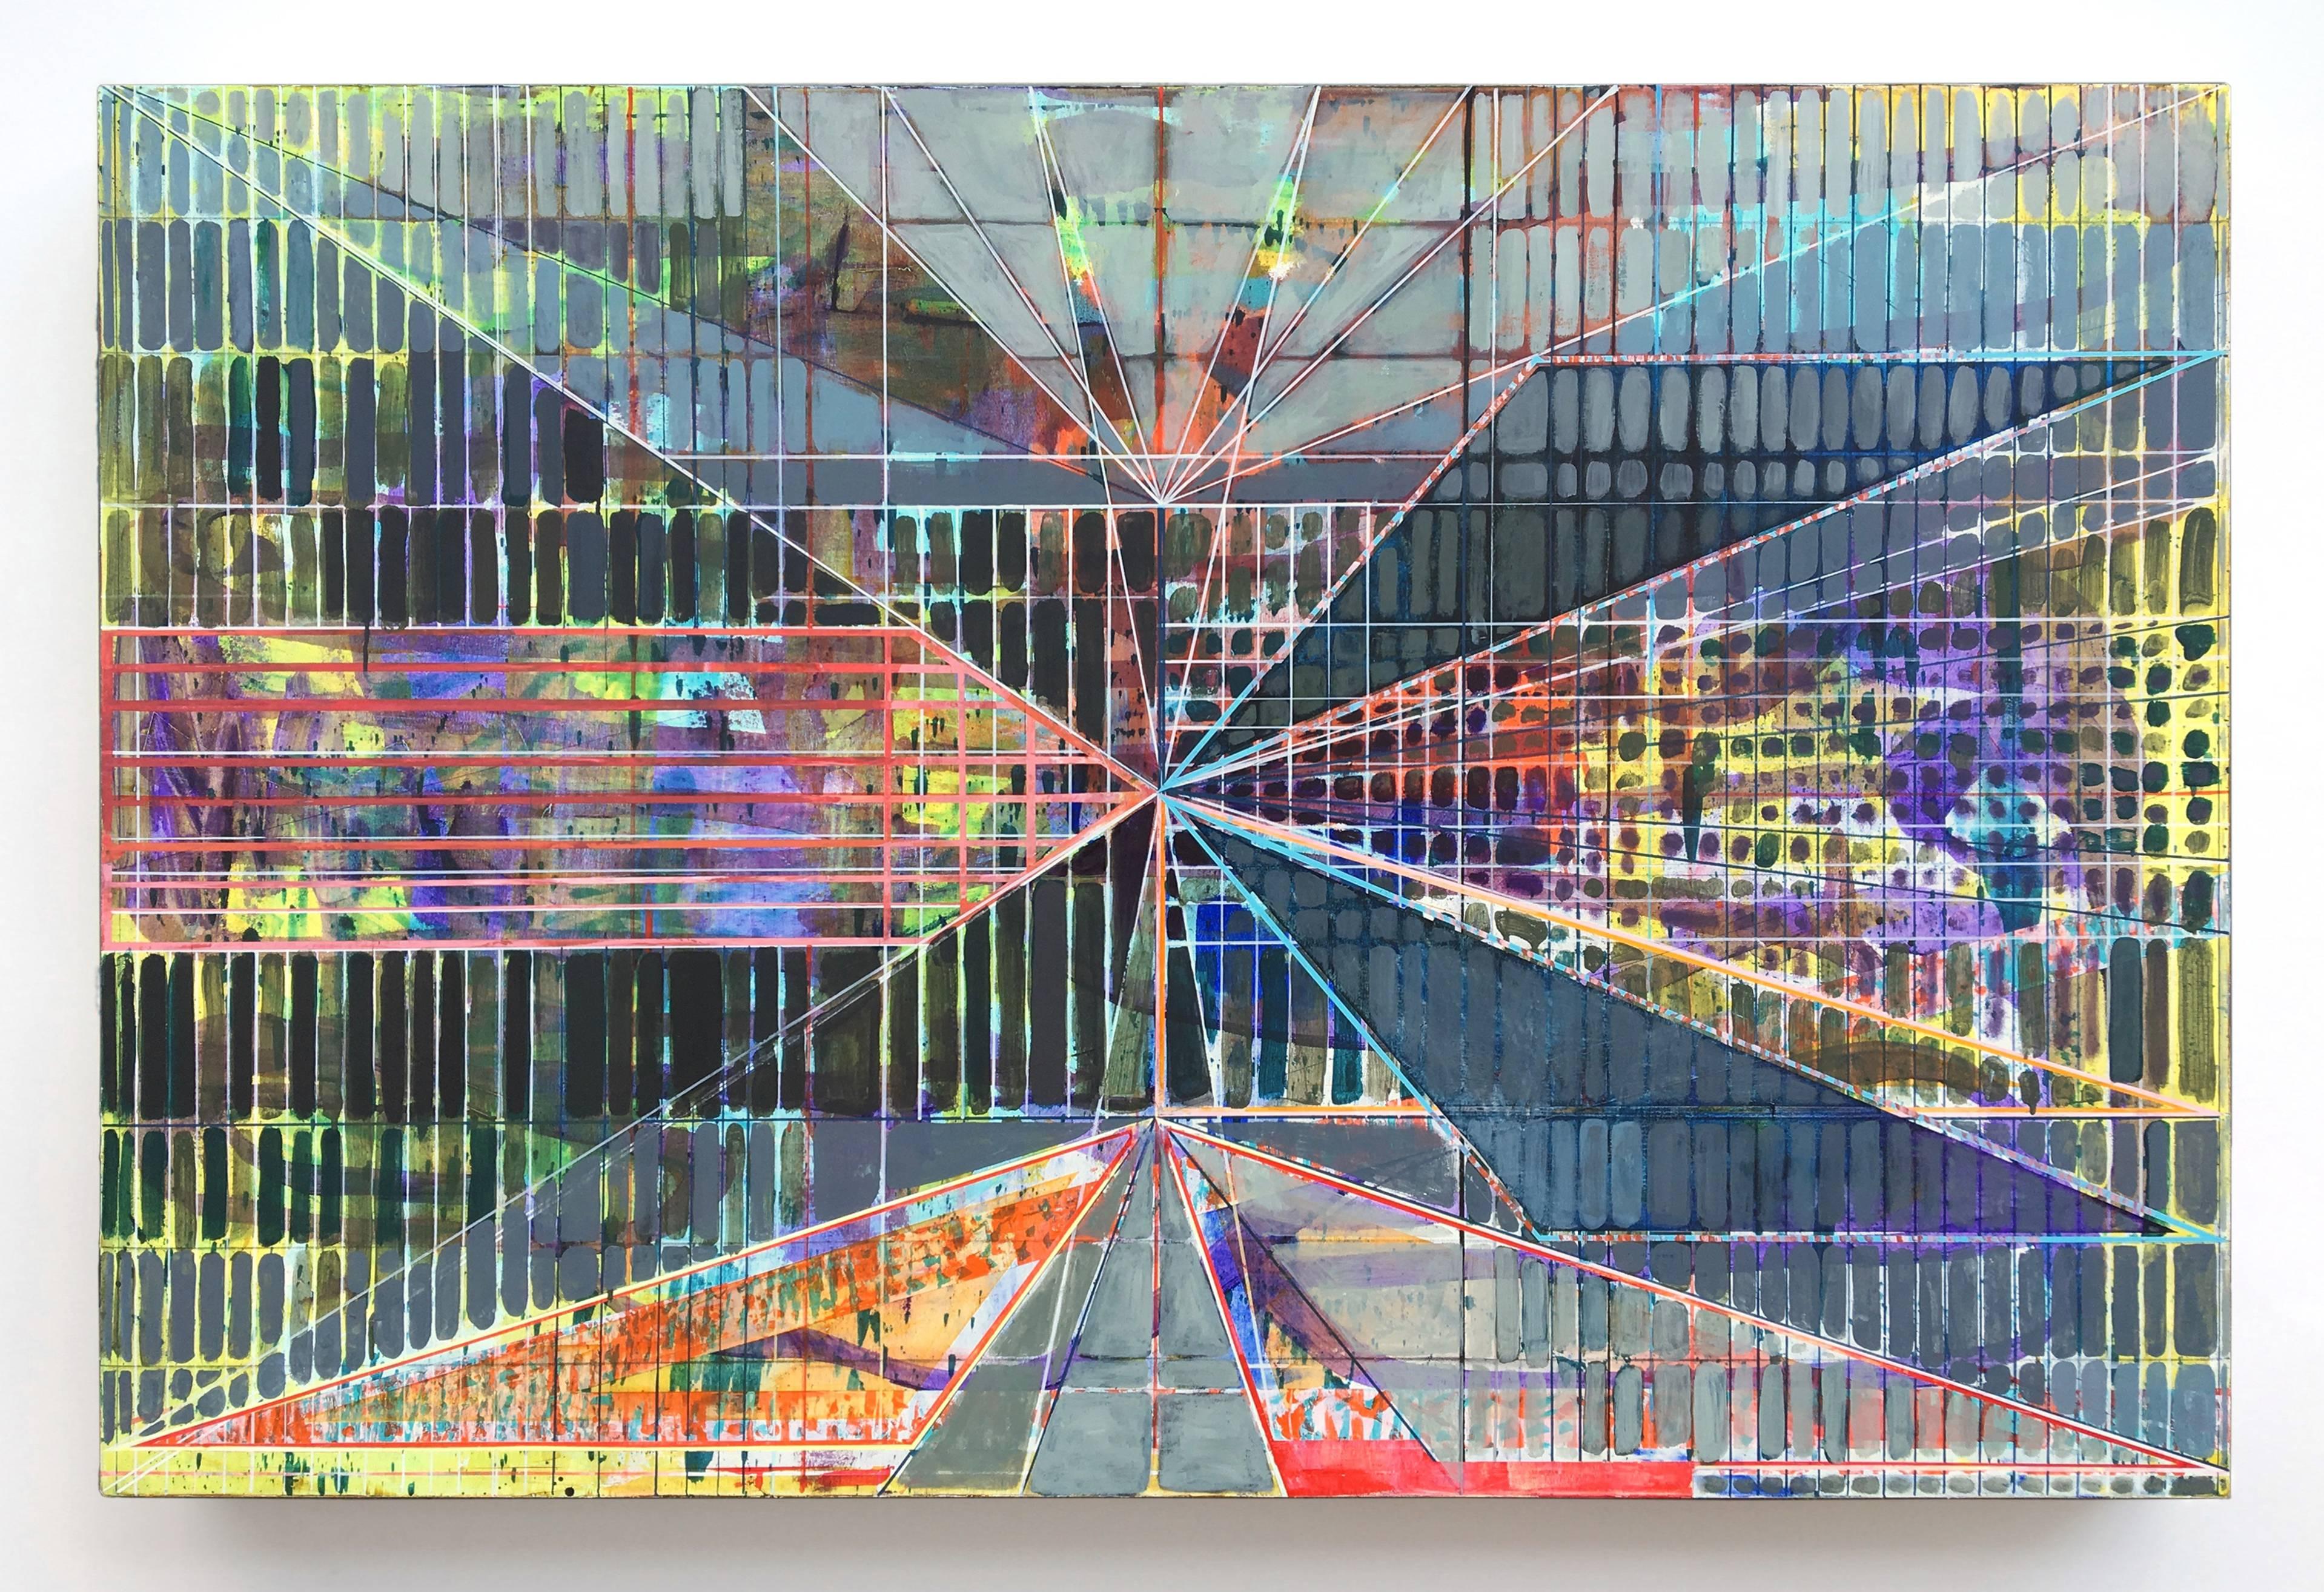 Joe Lloyd, Yellow Pattern, 2017, acrylic on canvas, 48 x 72 inches is a colorful geometric abstract painting with highlights of yellow, violet and turquoise. The hard edges of the geometric framework are complimented by the translucent layers of